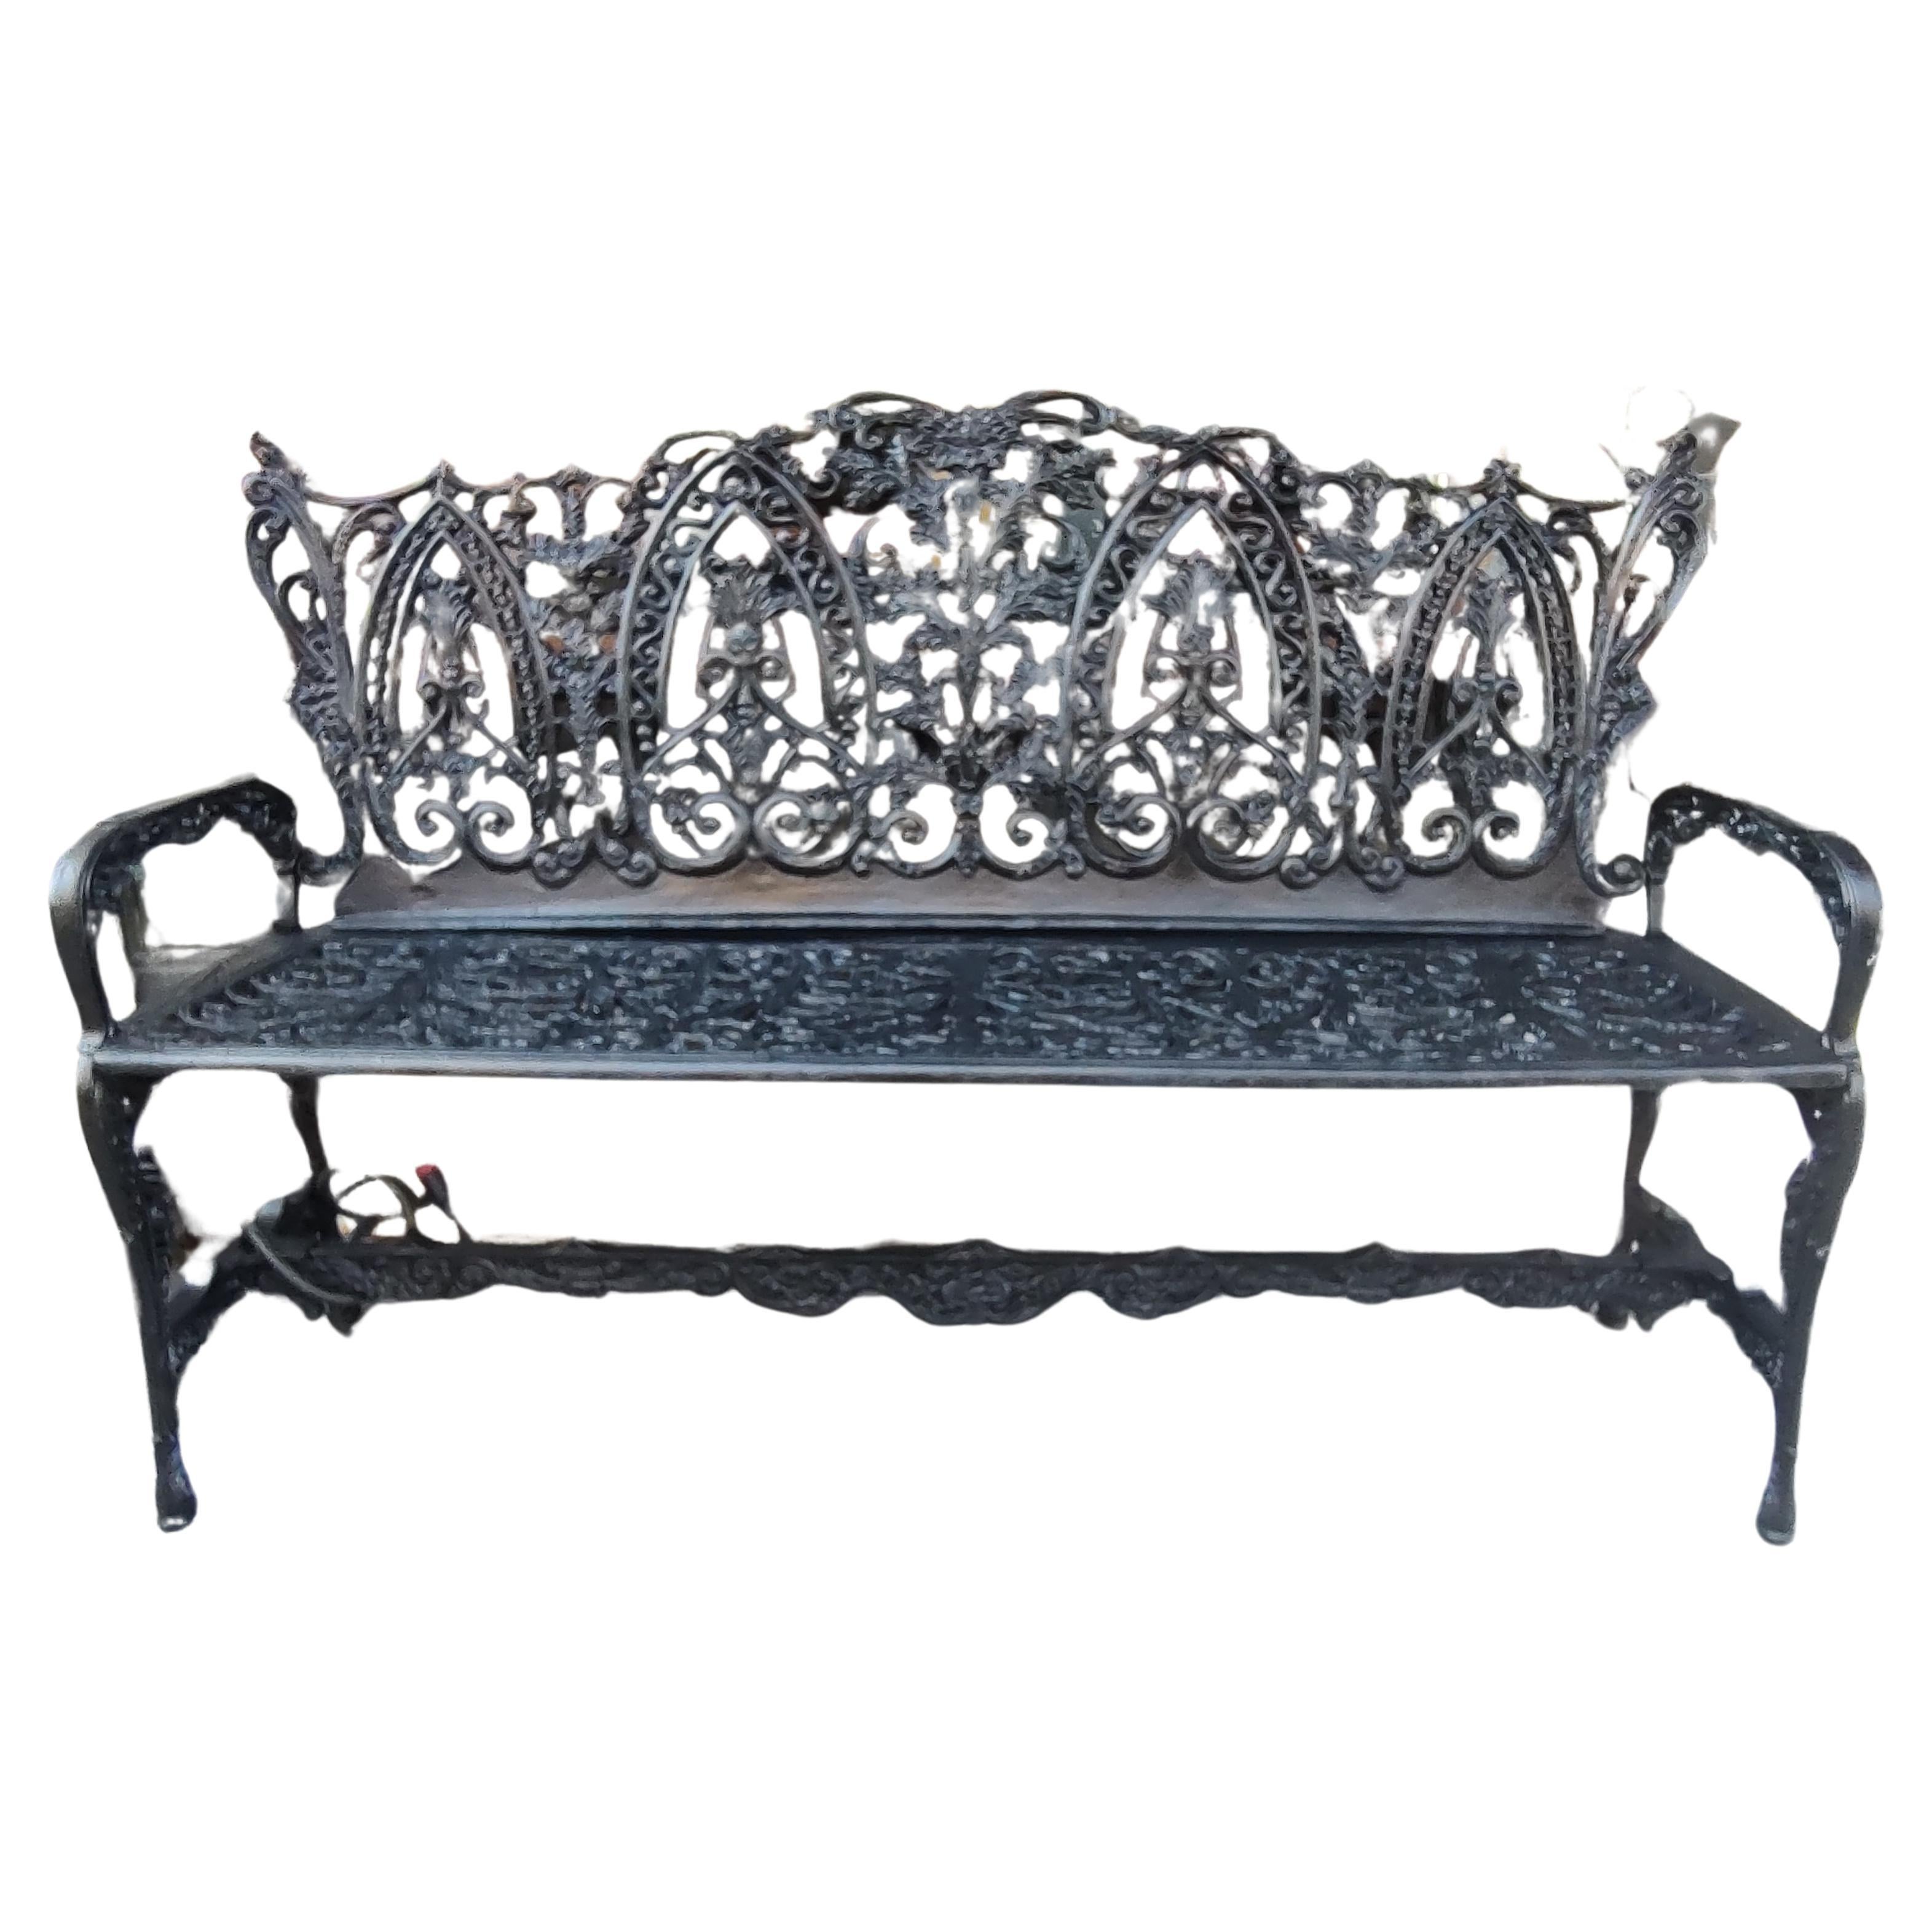 Late 20th Century Large Cast Iron Garden Bench In The Style of Art Noveau Renaissance Revival  For Sale